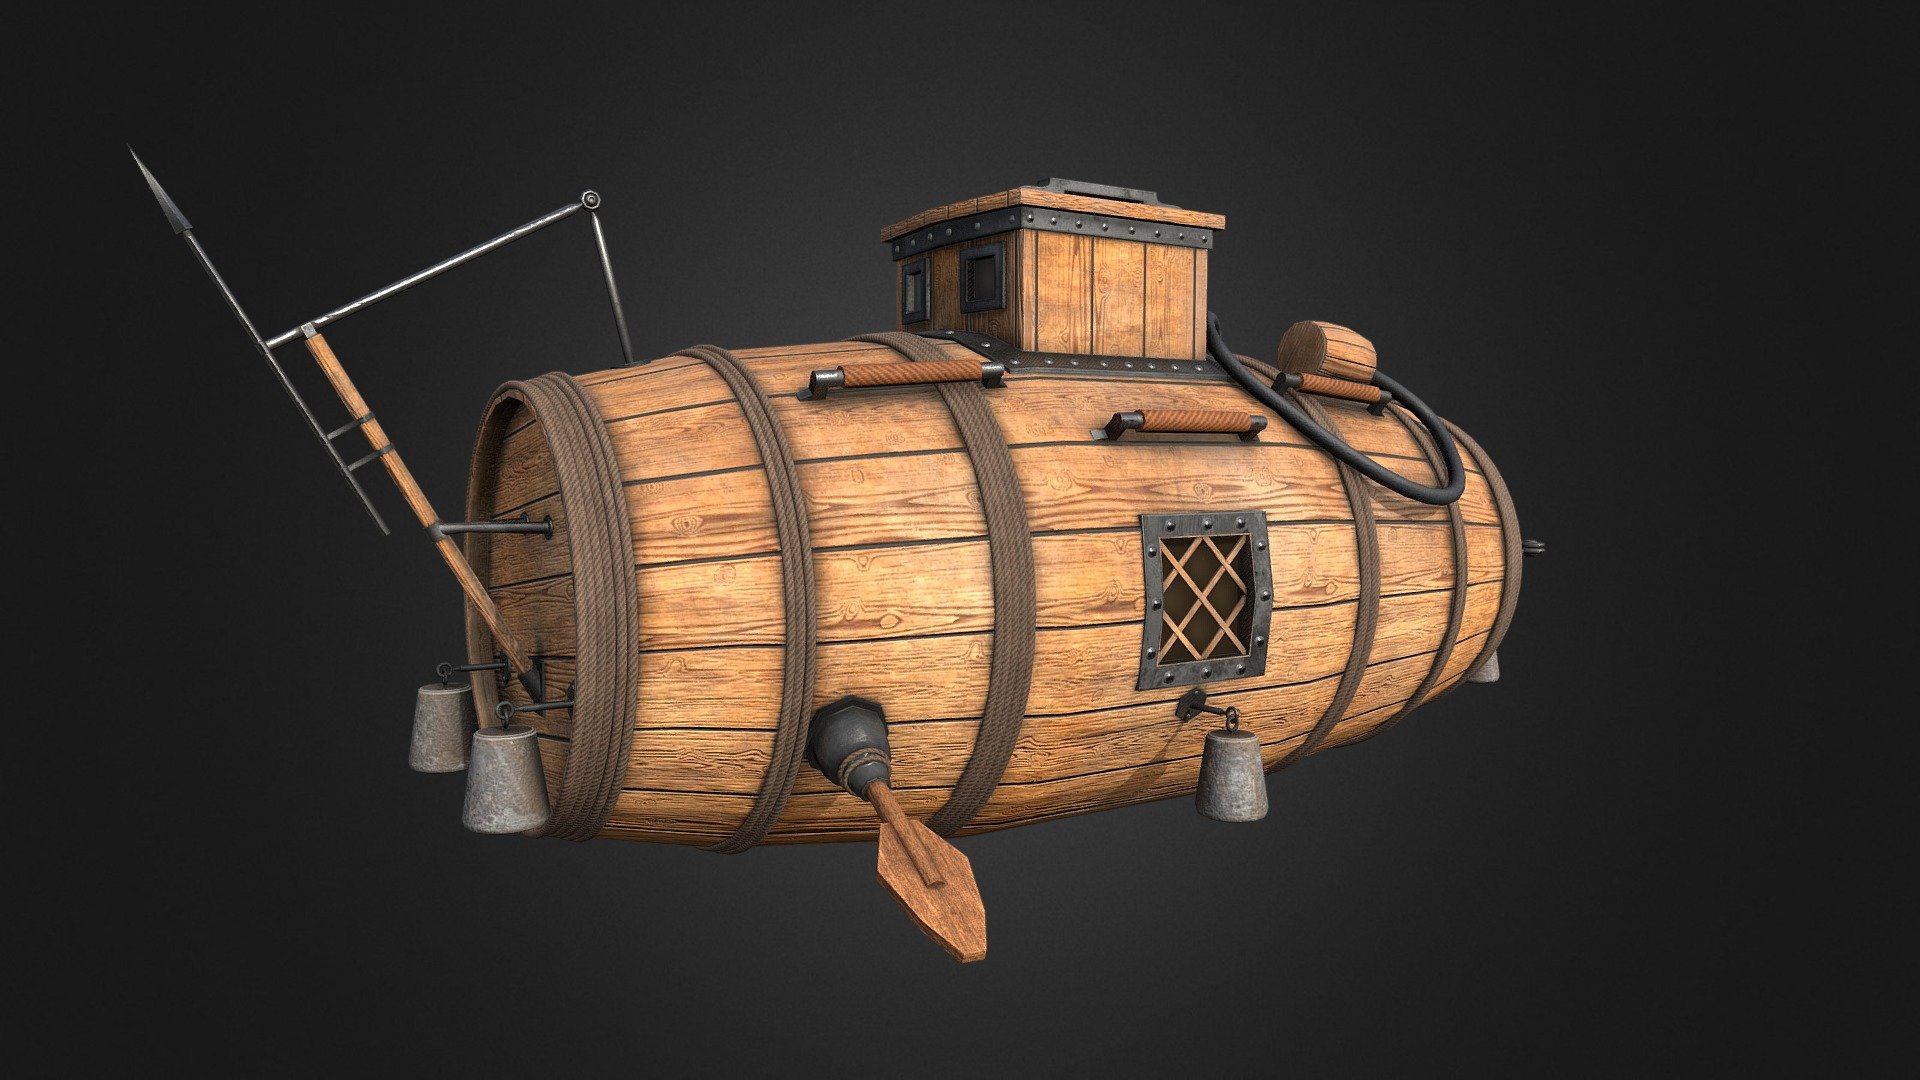 The first Russian submarine


The first Russian submarine game ready asset is a high quality, low poly asset originally modeled in blender 2.92.0
The normal map was baked from a high poly model in Substance Painter 2020, making this model look very detailed without using many polygons.
This model is intended for game/real time/ usage/close-UPS/illustraions/historical movies/short films/cartoons/various renderings.
The renders and wireframes were done in Marmoset Toolbag 4.
Optimized for games (game ready)
This model is not intended for subdivision.
Modelled in Blender
Textured in Substance Painter
All materials and objects named appropriately.
Tested in Marmoset Toolbag 4 (see renders).
No special plug-ins needed to use this product.

 Specifications


Texture Size: 2048x2048
Textures format: PNG
Textures: Base Color, Roughness, Metallic + Normal OpenGl
Tris: 46,258;
Faces: 22,993;
Verts: 24,122;

Historical reference: rbth.com/history/333406-first-russian-submarine - The first Russian submarine - 3D model by Yahor Yurkavets (@Got2b) 3d model